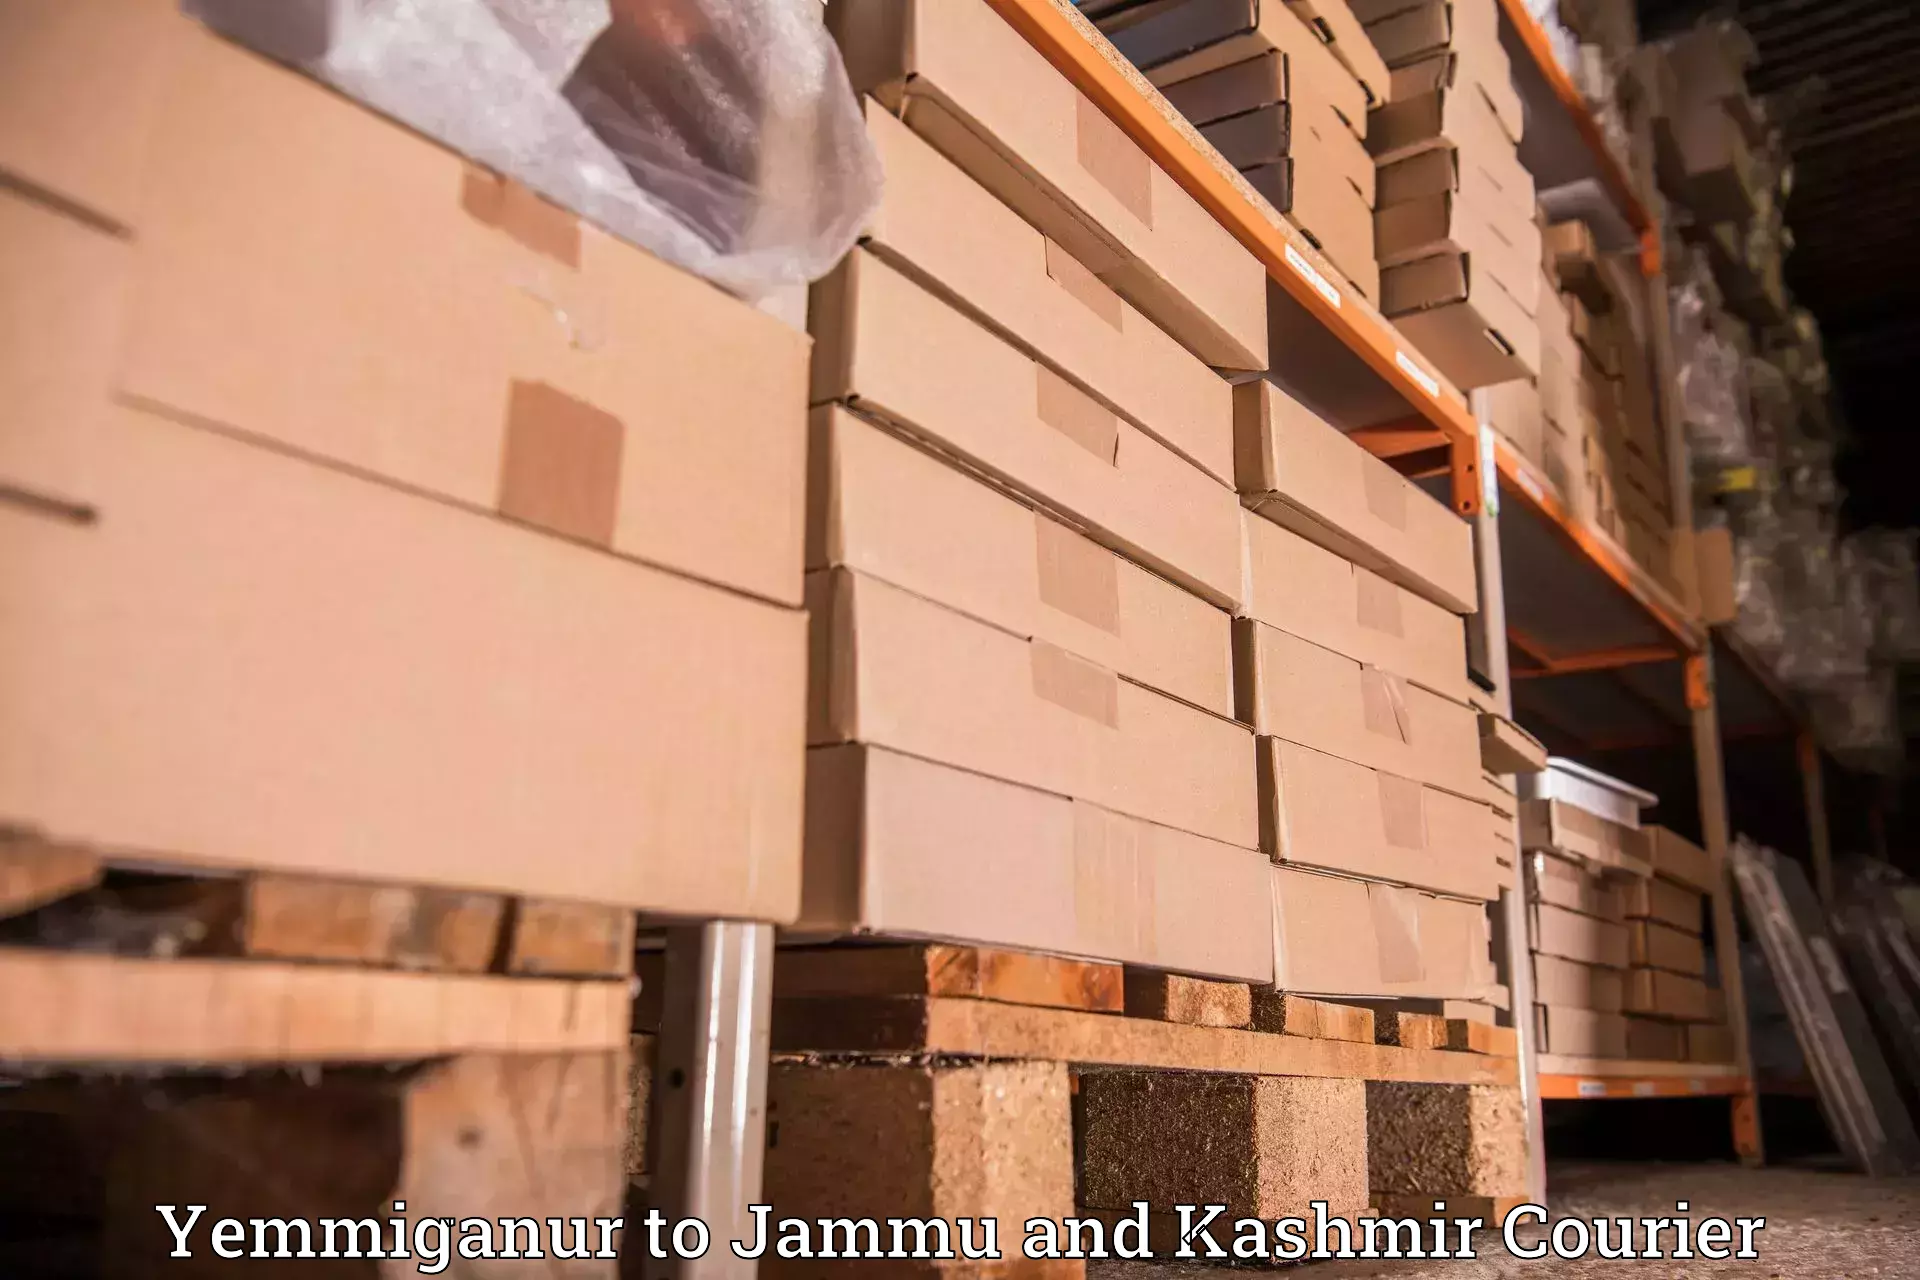 Speedy delivery service Yemmiganur to Poonch